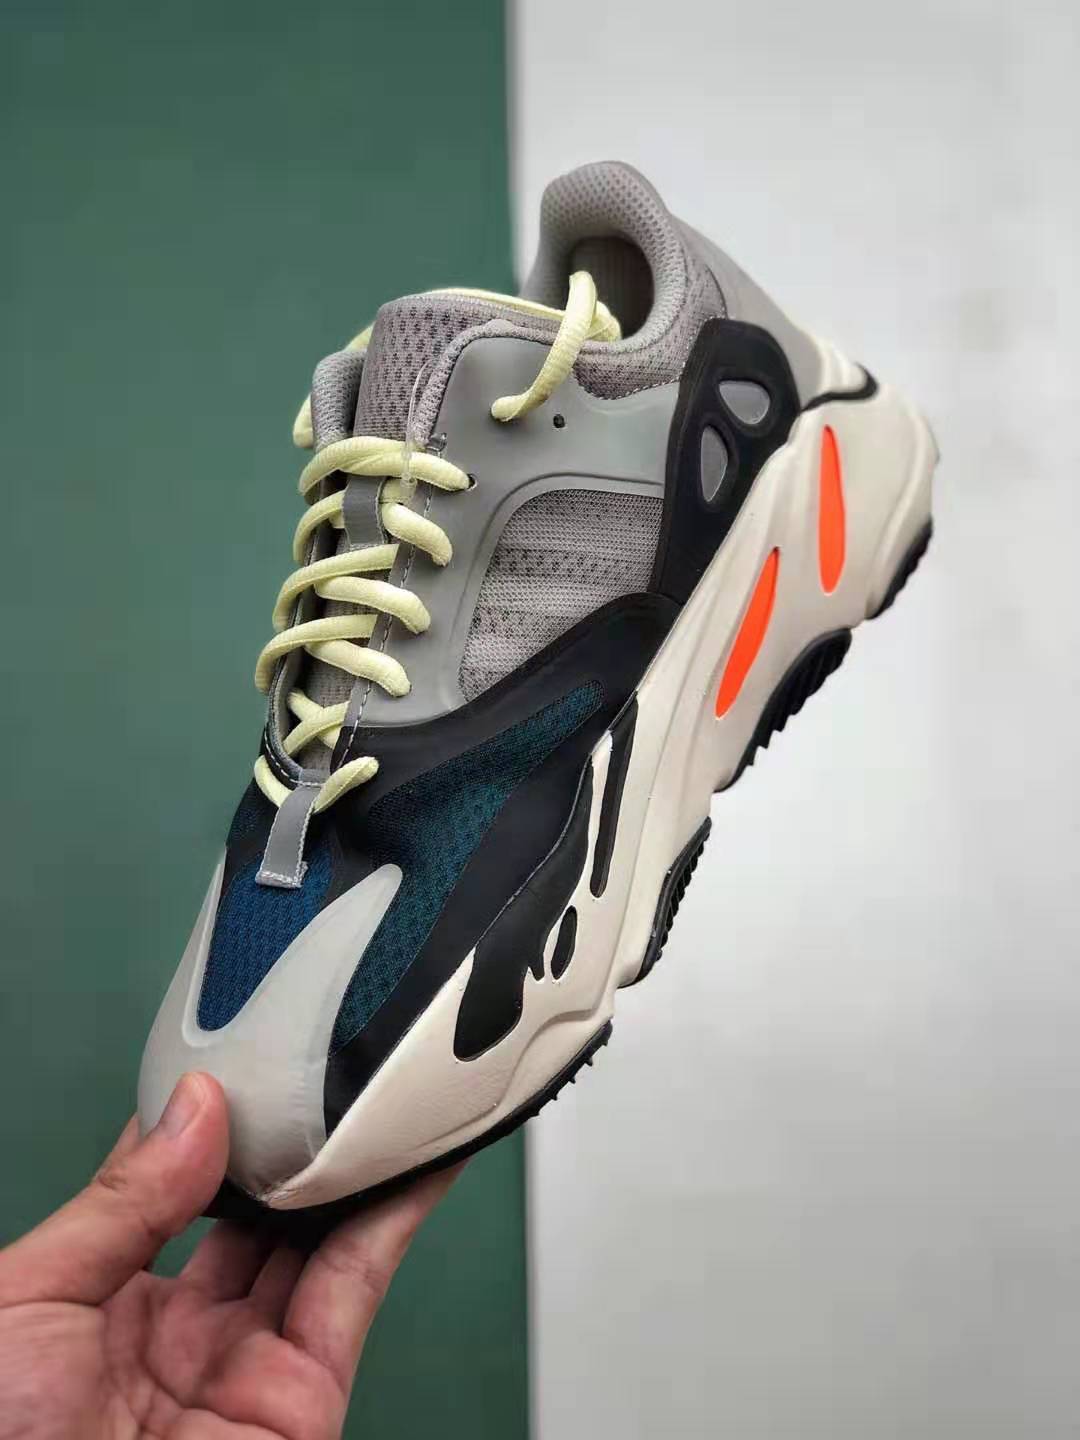 ADIDAS YEEZY BOOST 700 'WAVE RUNNER' B75571 - Premium Footwear for Style and Performance